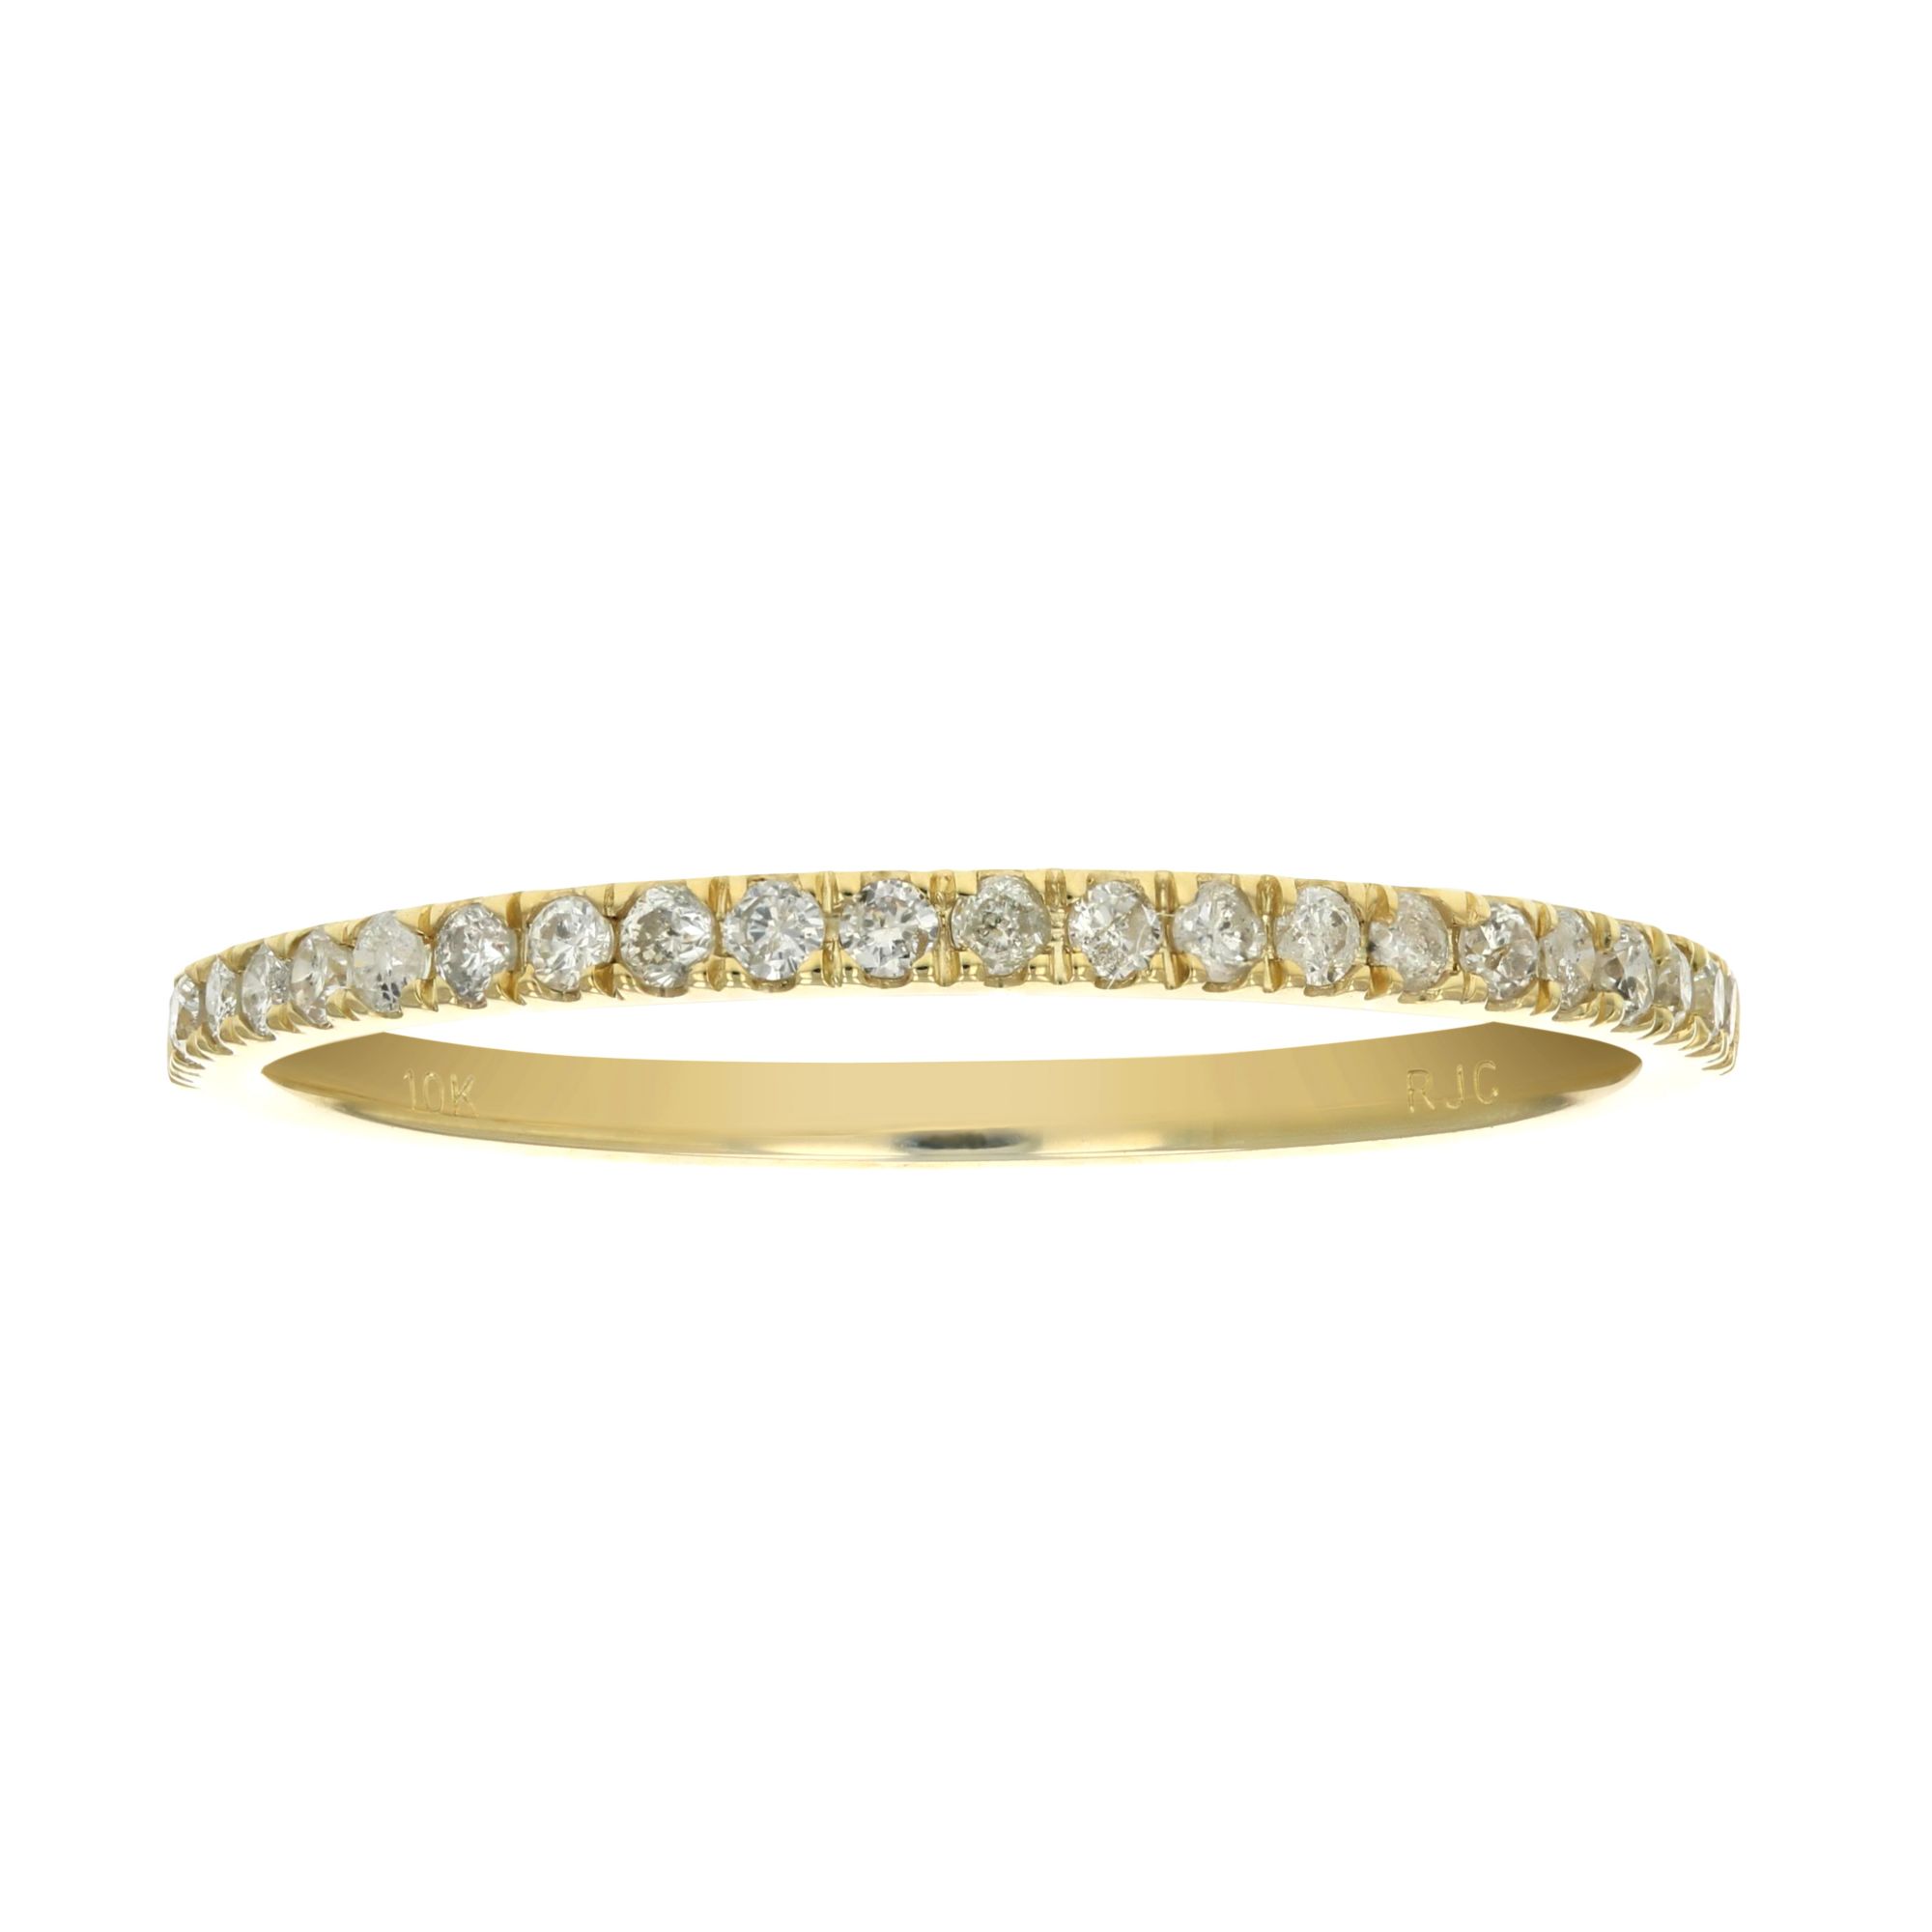 Amairah .16 ct. t.w. Diamond Pave Wedding Band in 10k Yellow Gold, Size 6